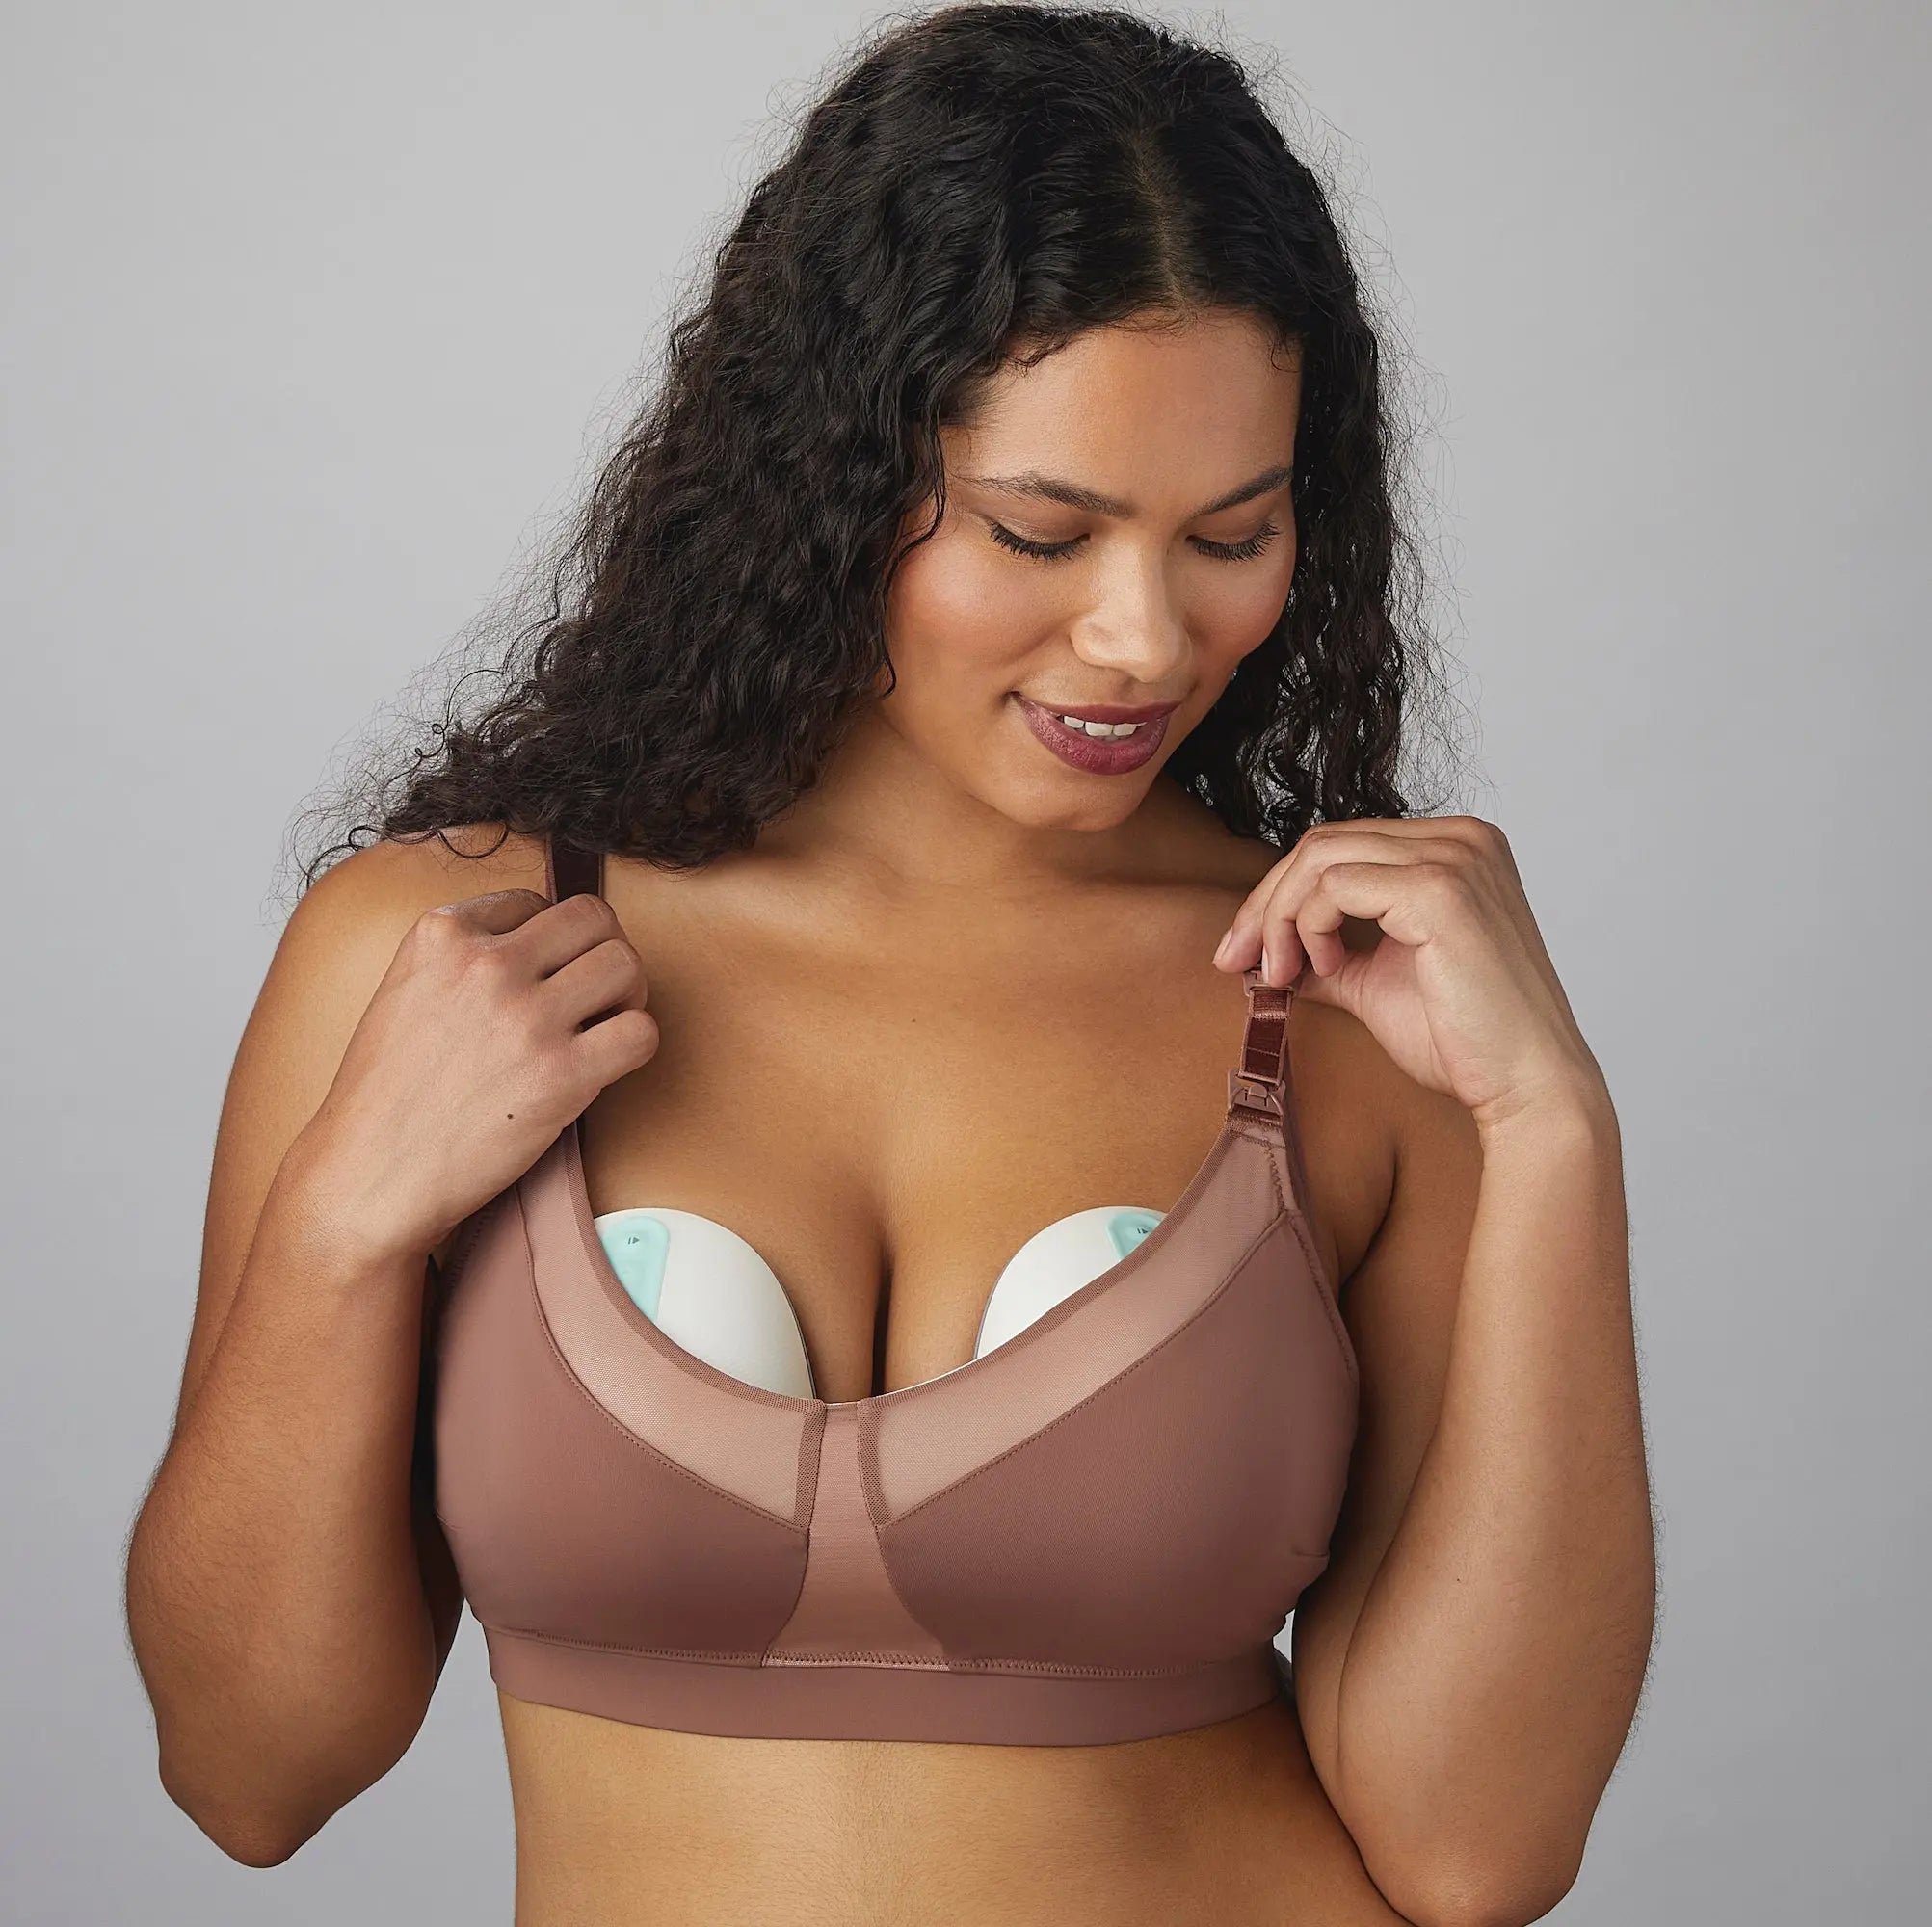 Daily Nursing plus pumping bra nutmeg image from the front, woman lounging